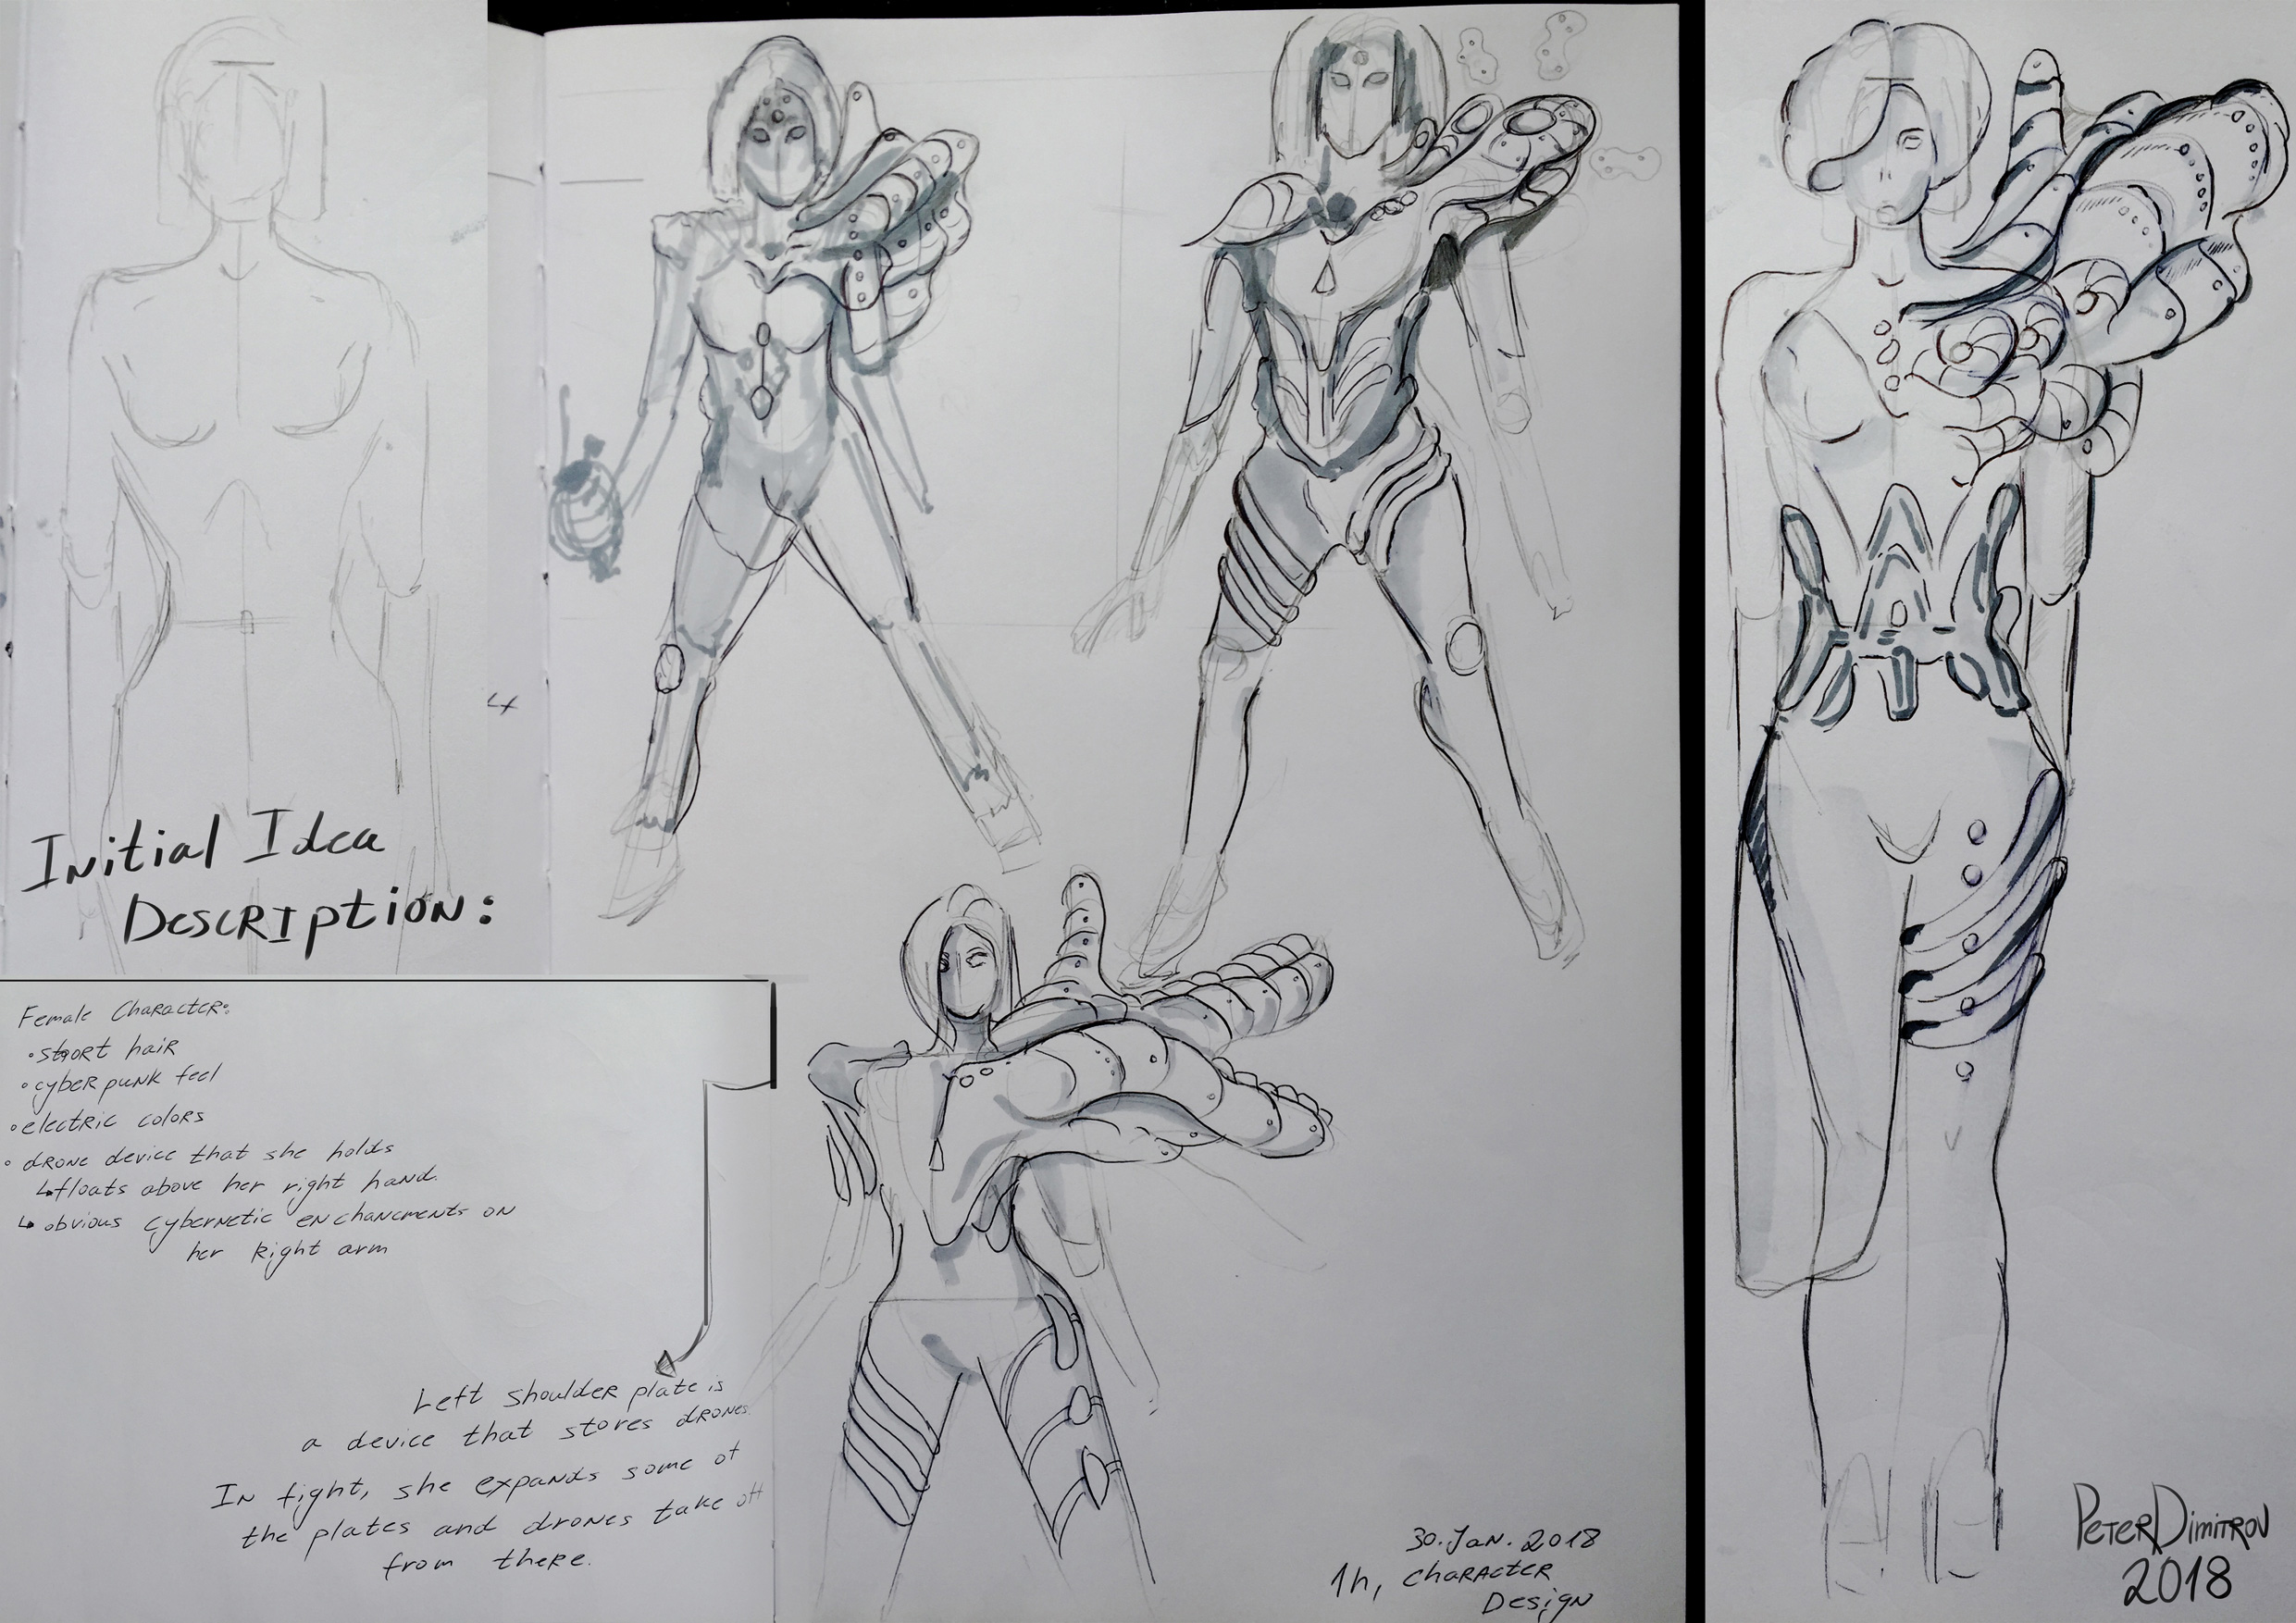 Few pages of sketches done in cold color markers. On top outlines are sketches in a black ballpoint pen. The sketches consist of full-body, concept art exploration of a woman character with oversized metal plate shoulder on her left.